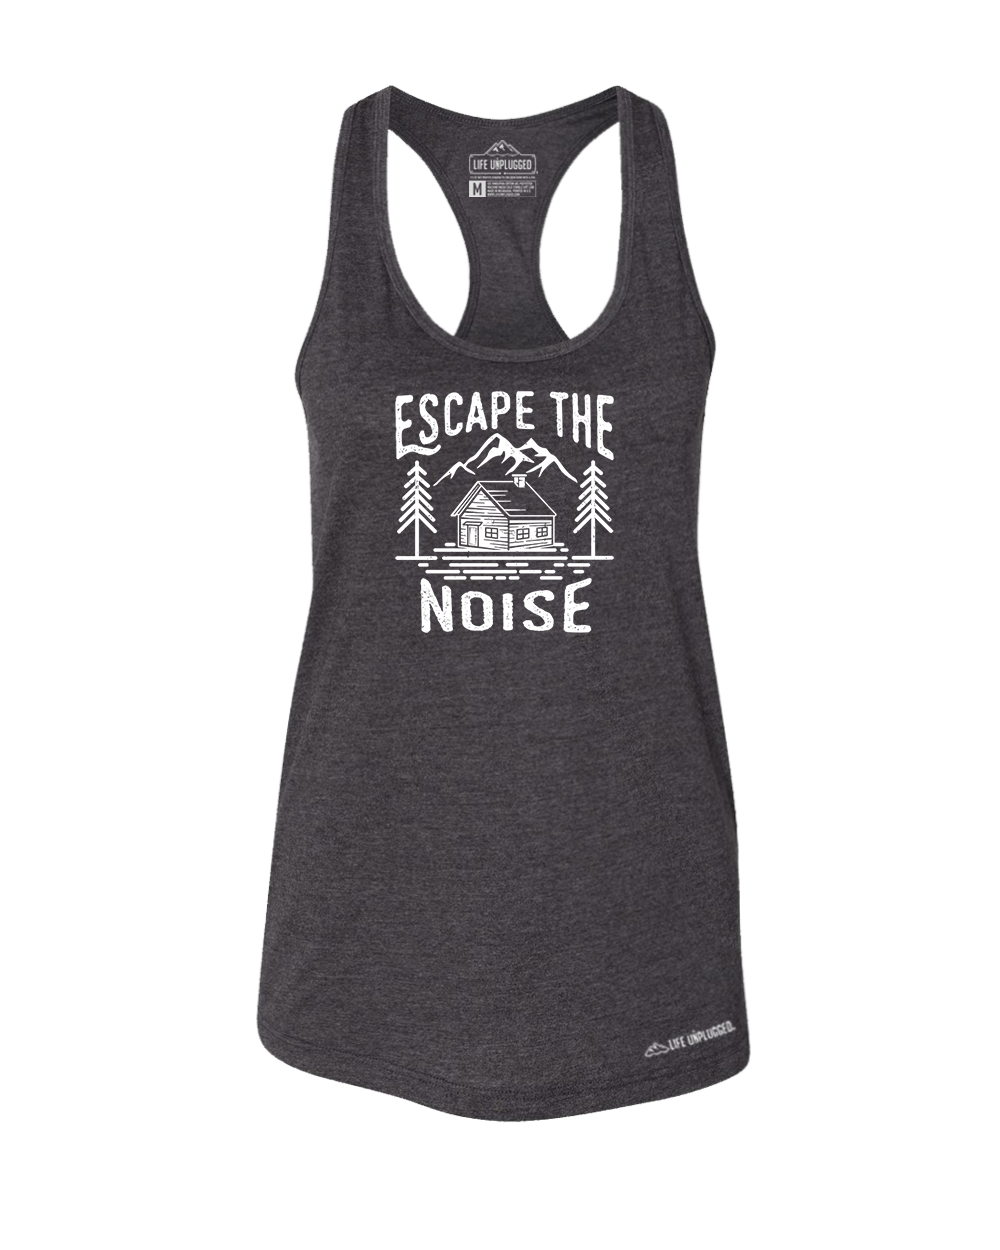 Escape The Noise Premium Women's Relaxed Fit Racerback Tank Top - Life Unplugged